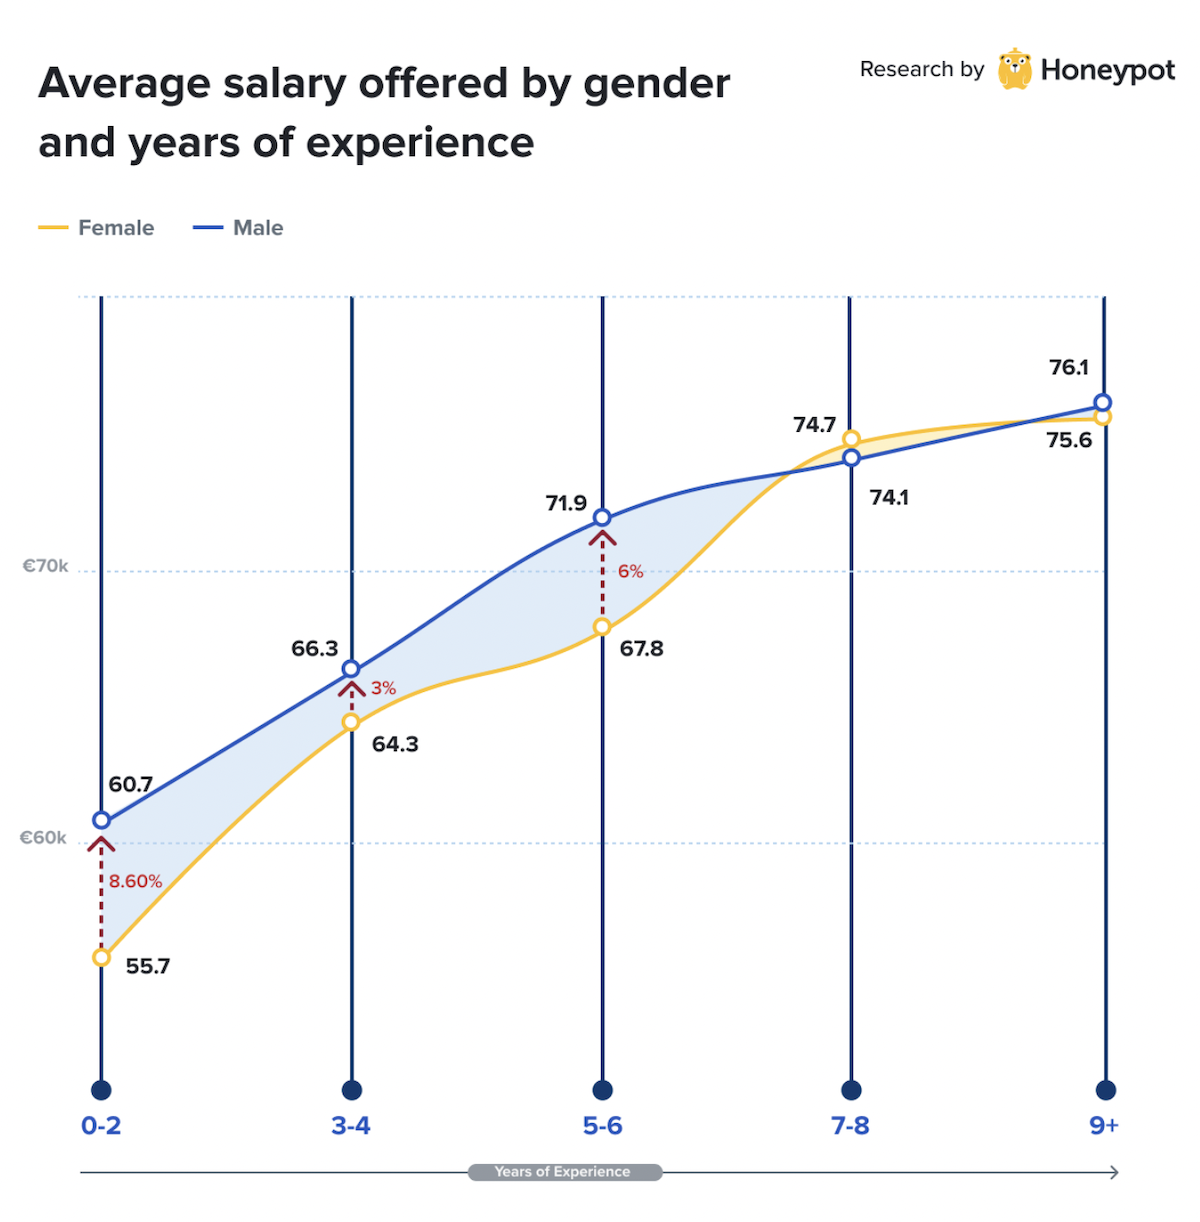 Germany – Average offered by gender and years of experience